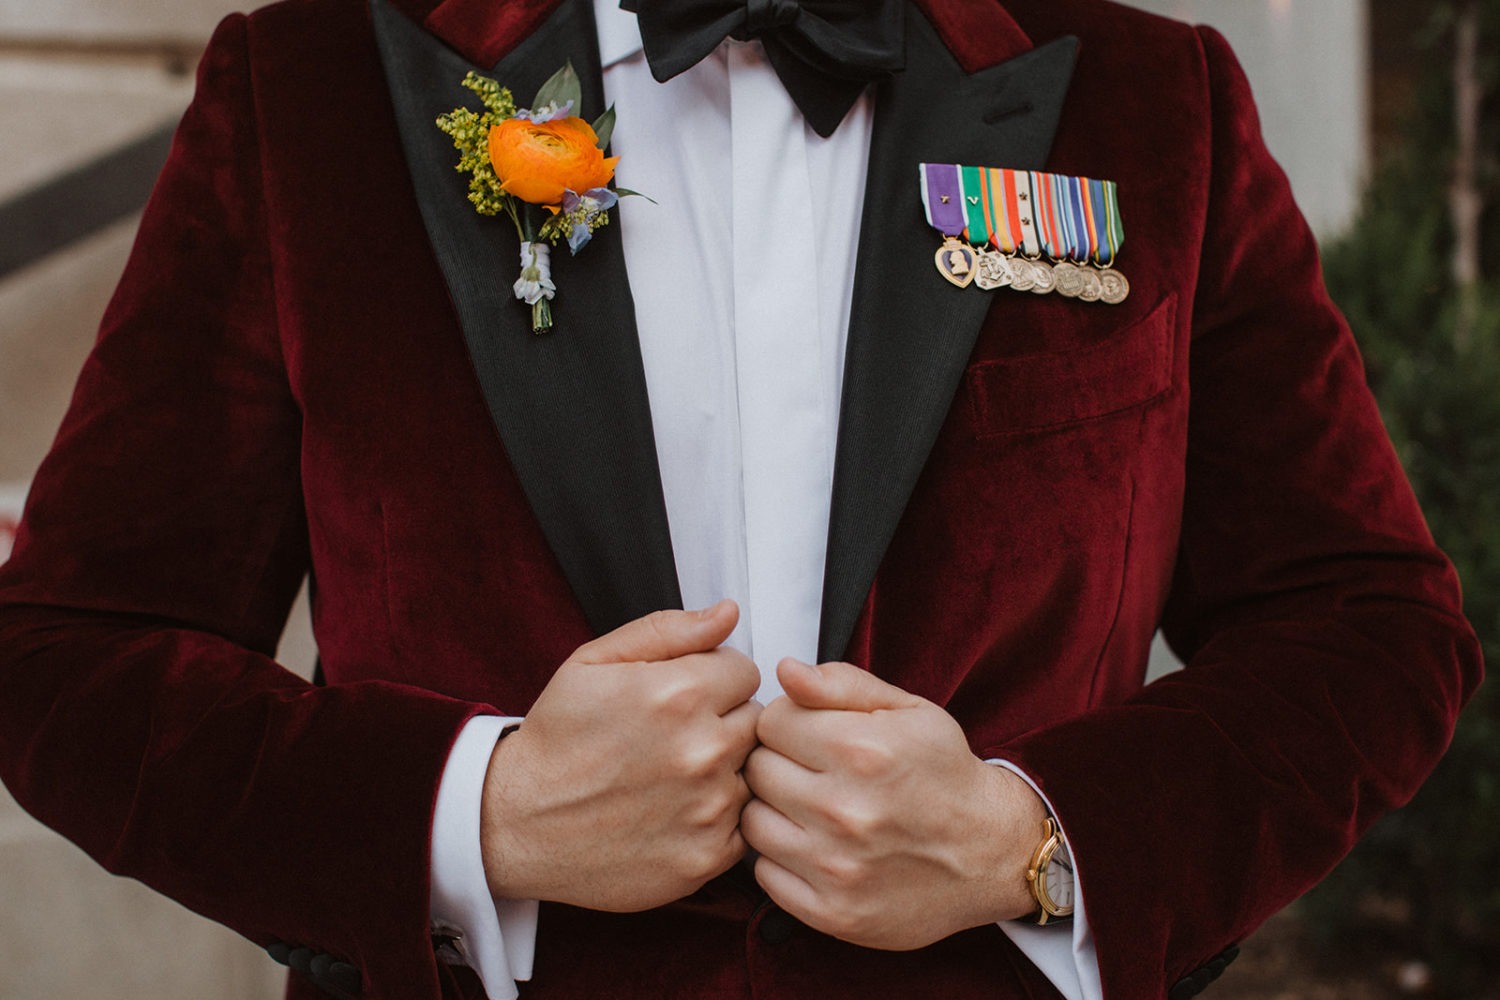 Groom holds suit jacket with boutonierre and medals